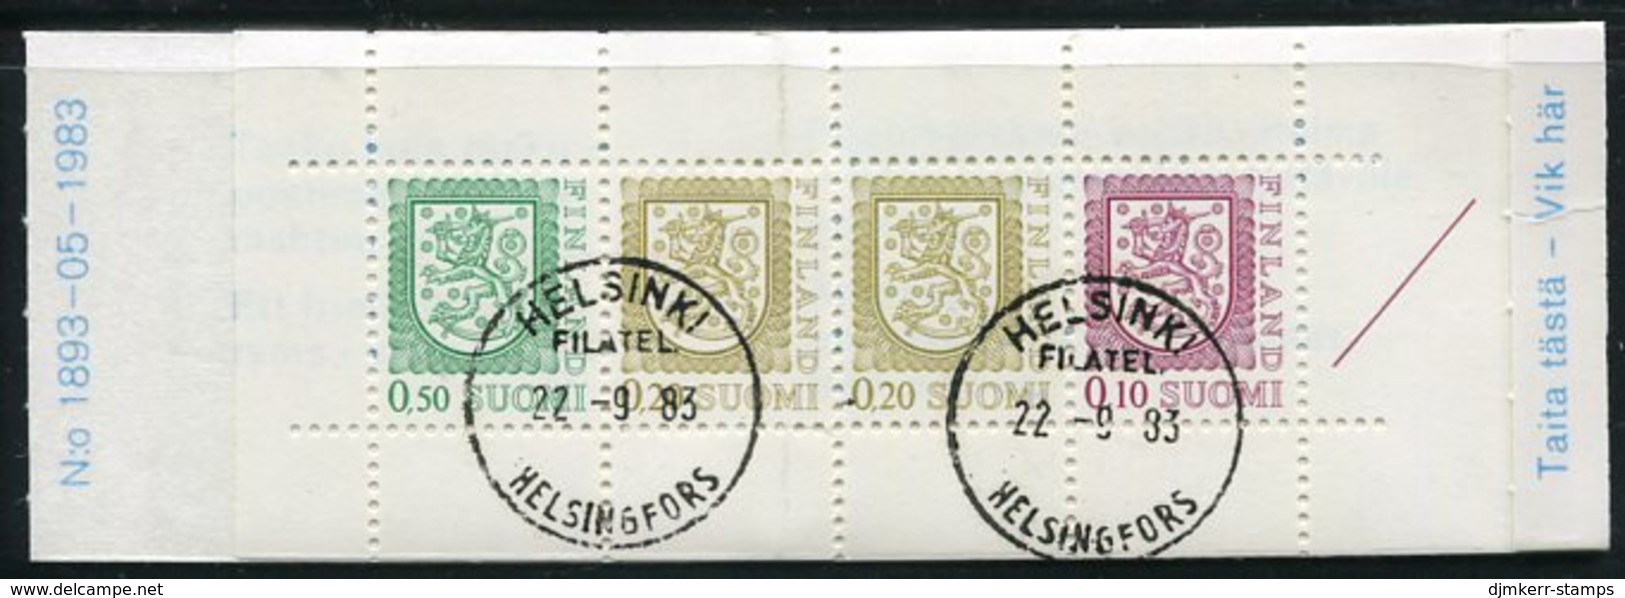 FINLAND 1983 Lion Definitive 1 Mk. Complete Booklet, Cancelled.  Michel MH 14 - Cuadernillos